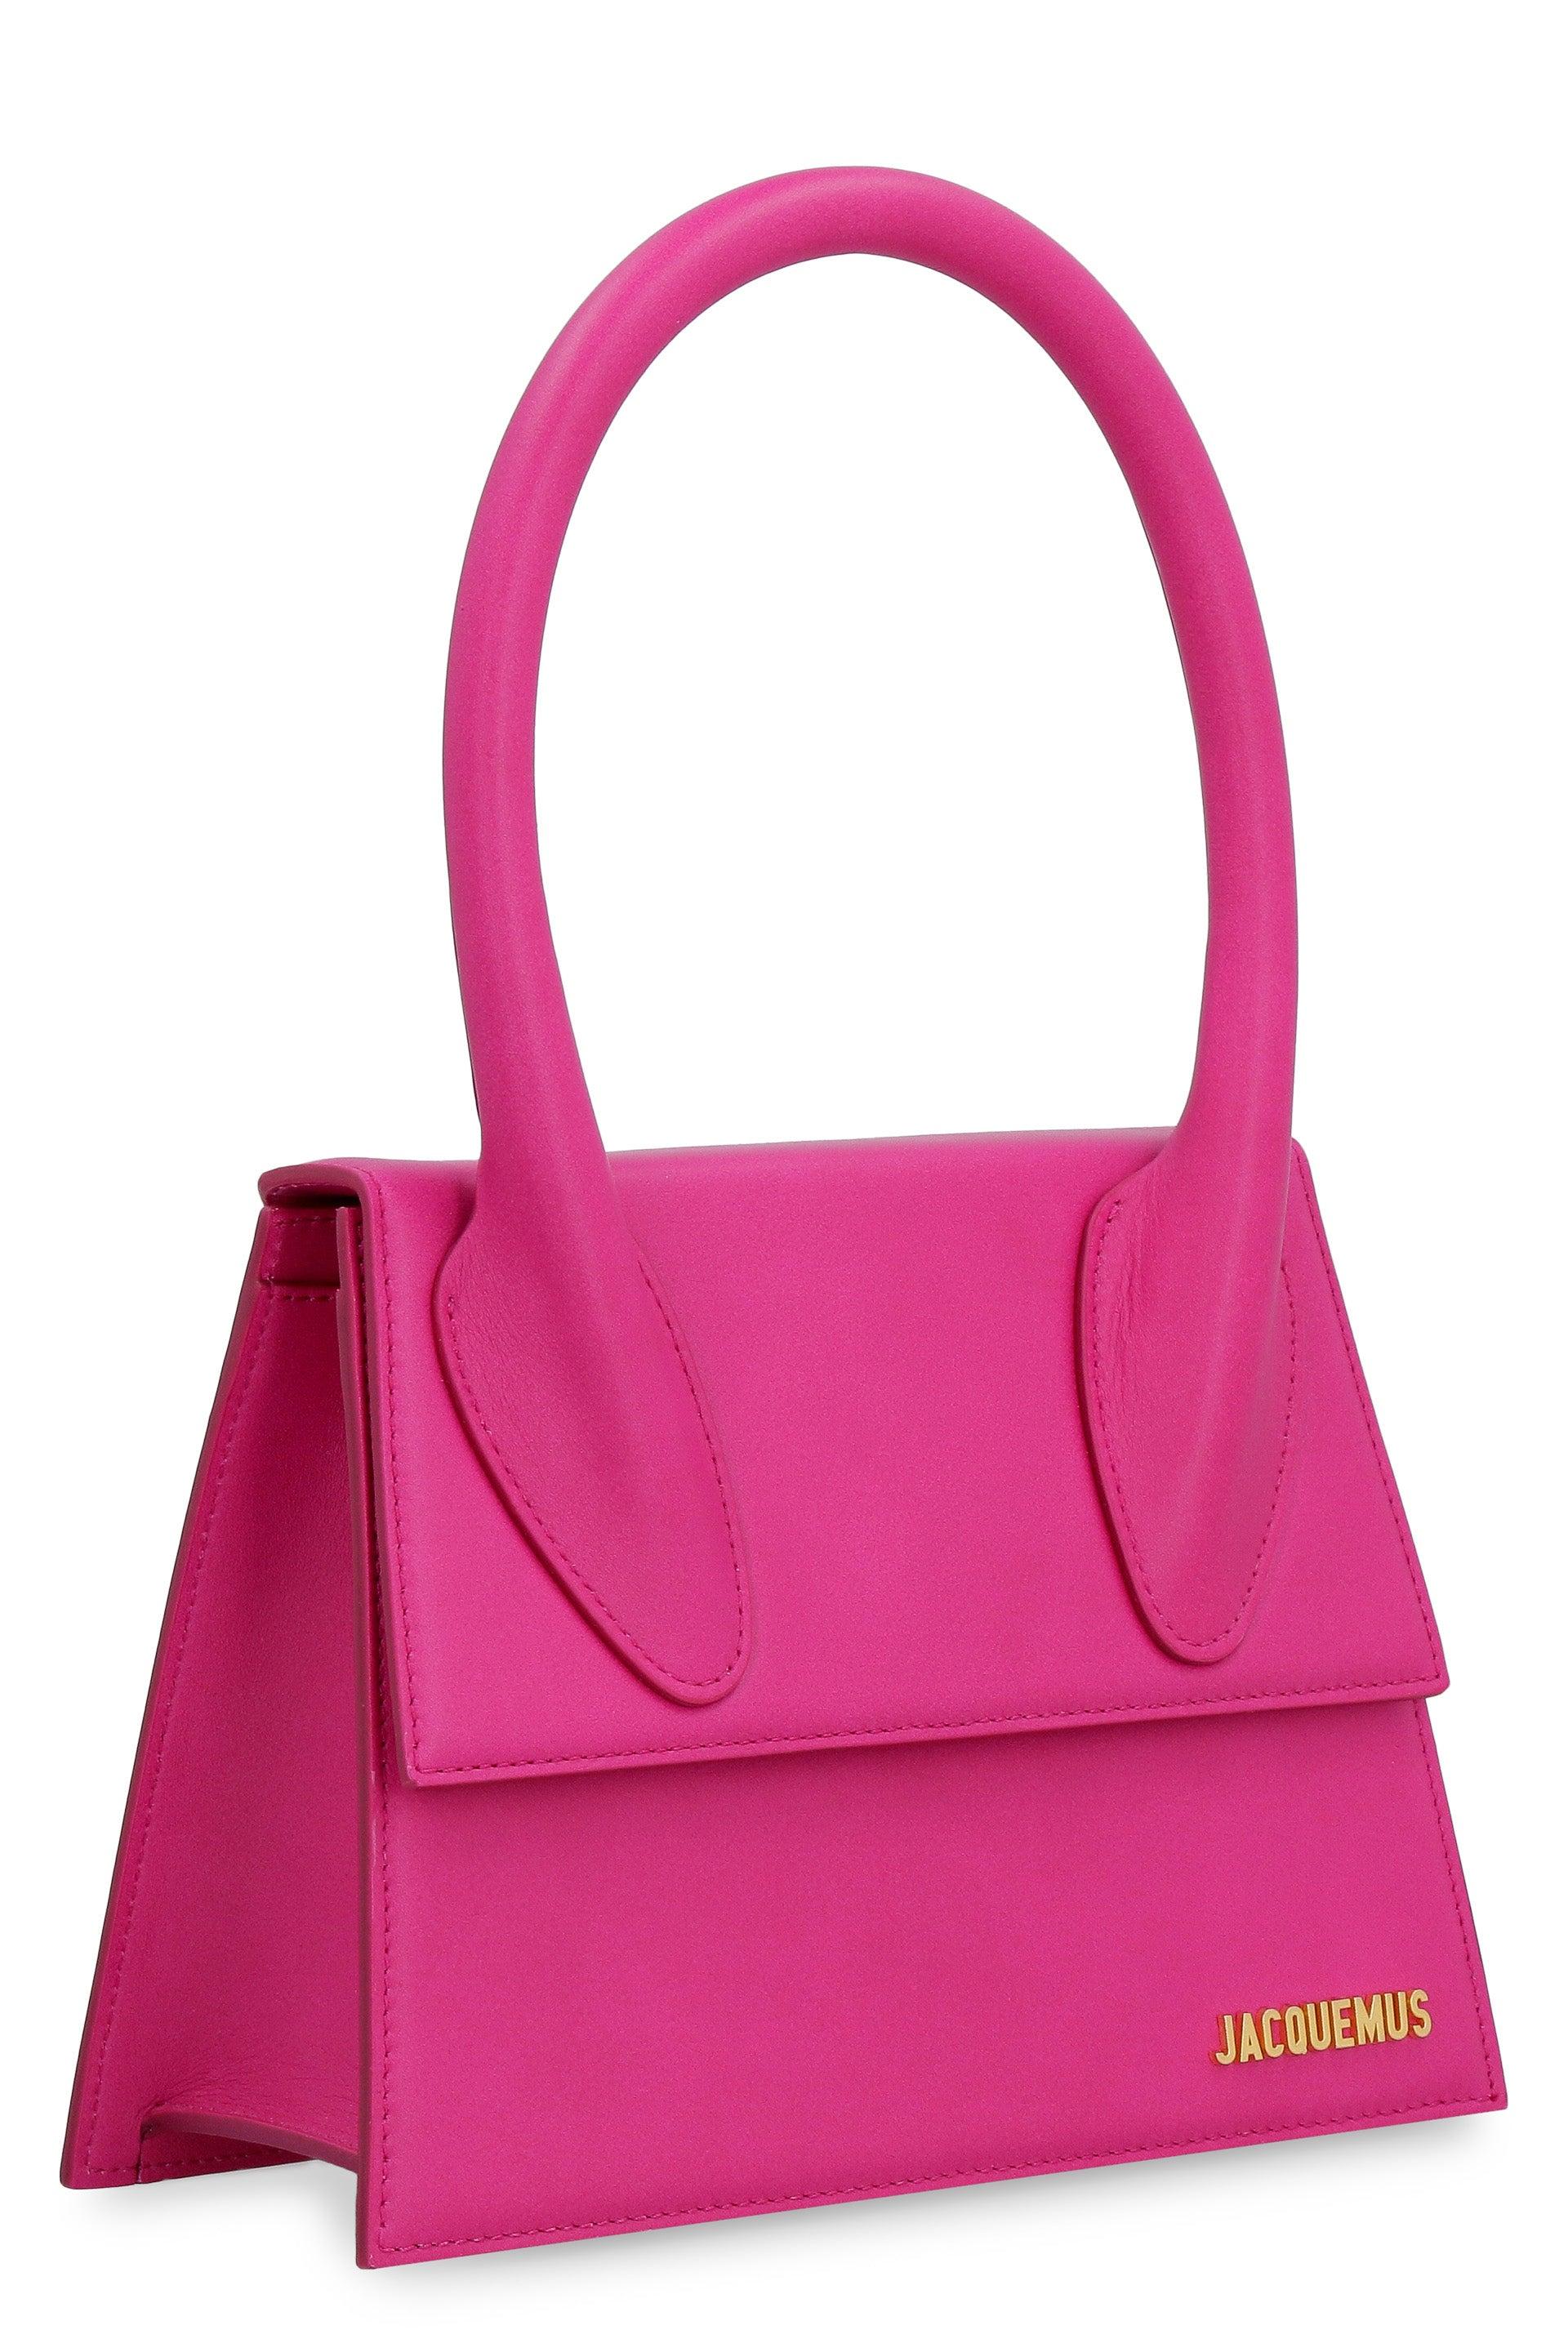 Jacquemus Le Grand Chiquito Leather Bag in Pink | Lyst